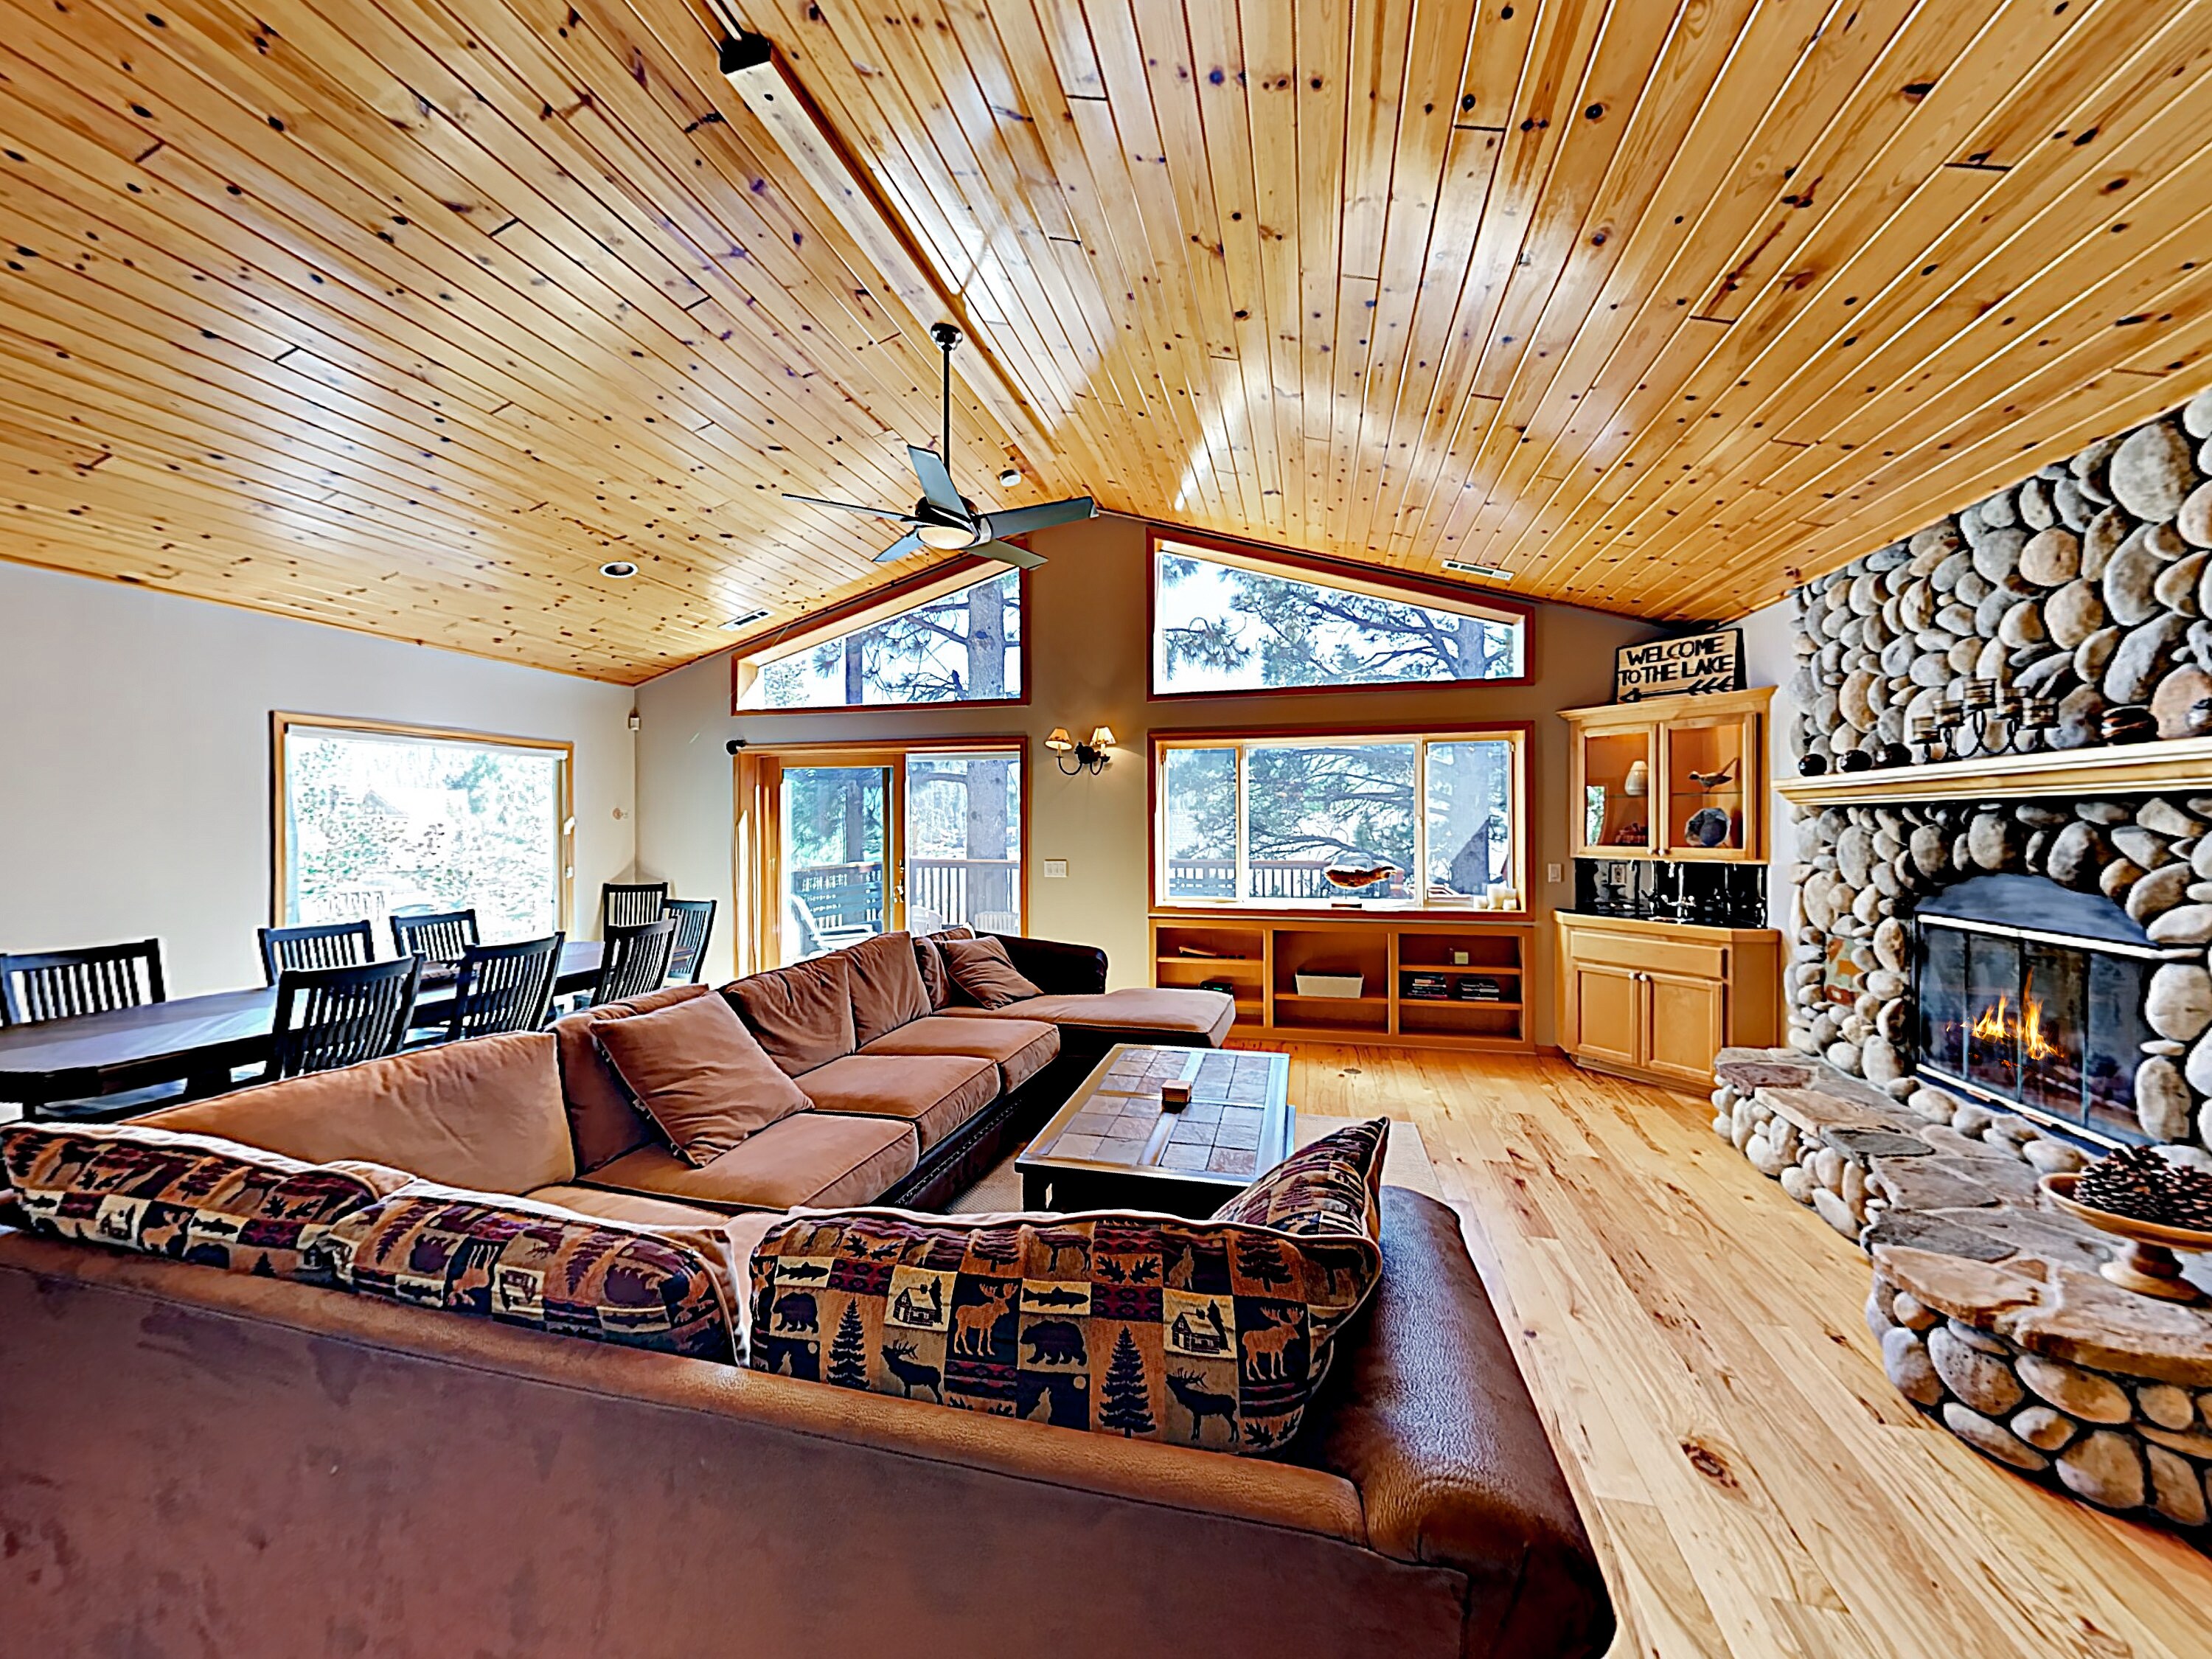 Welcome to Big Bear! Sunlight fills the Great Room, setting off glossy pecan floors and vaulted ceilings.